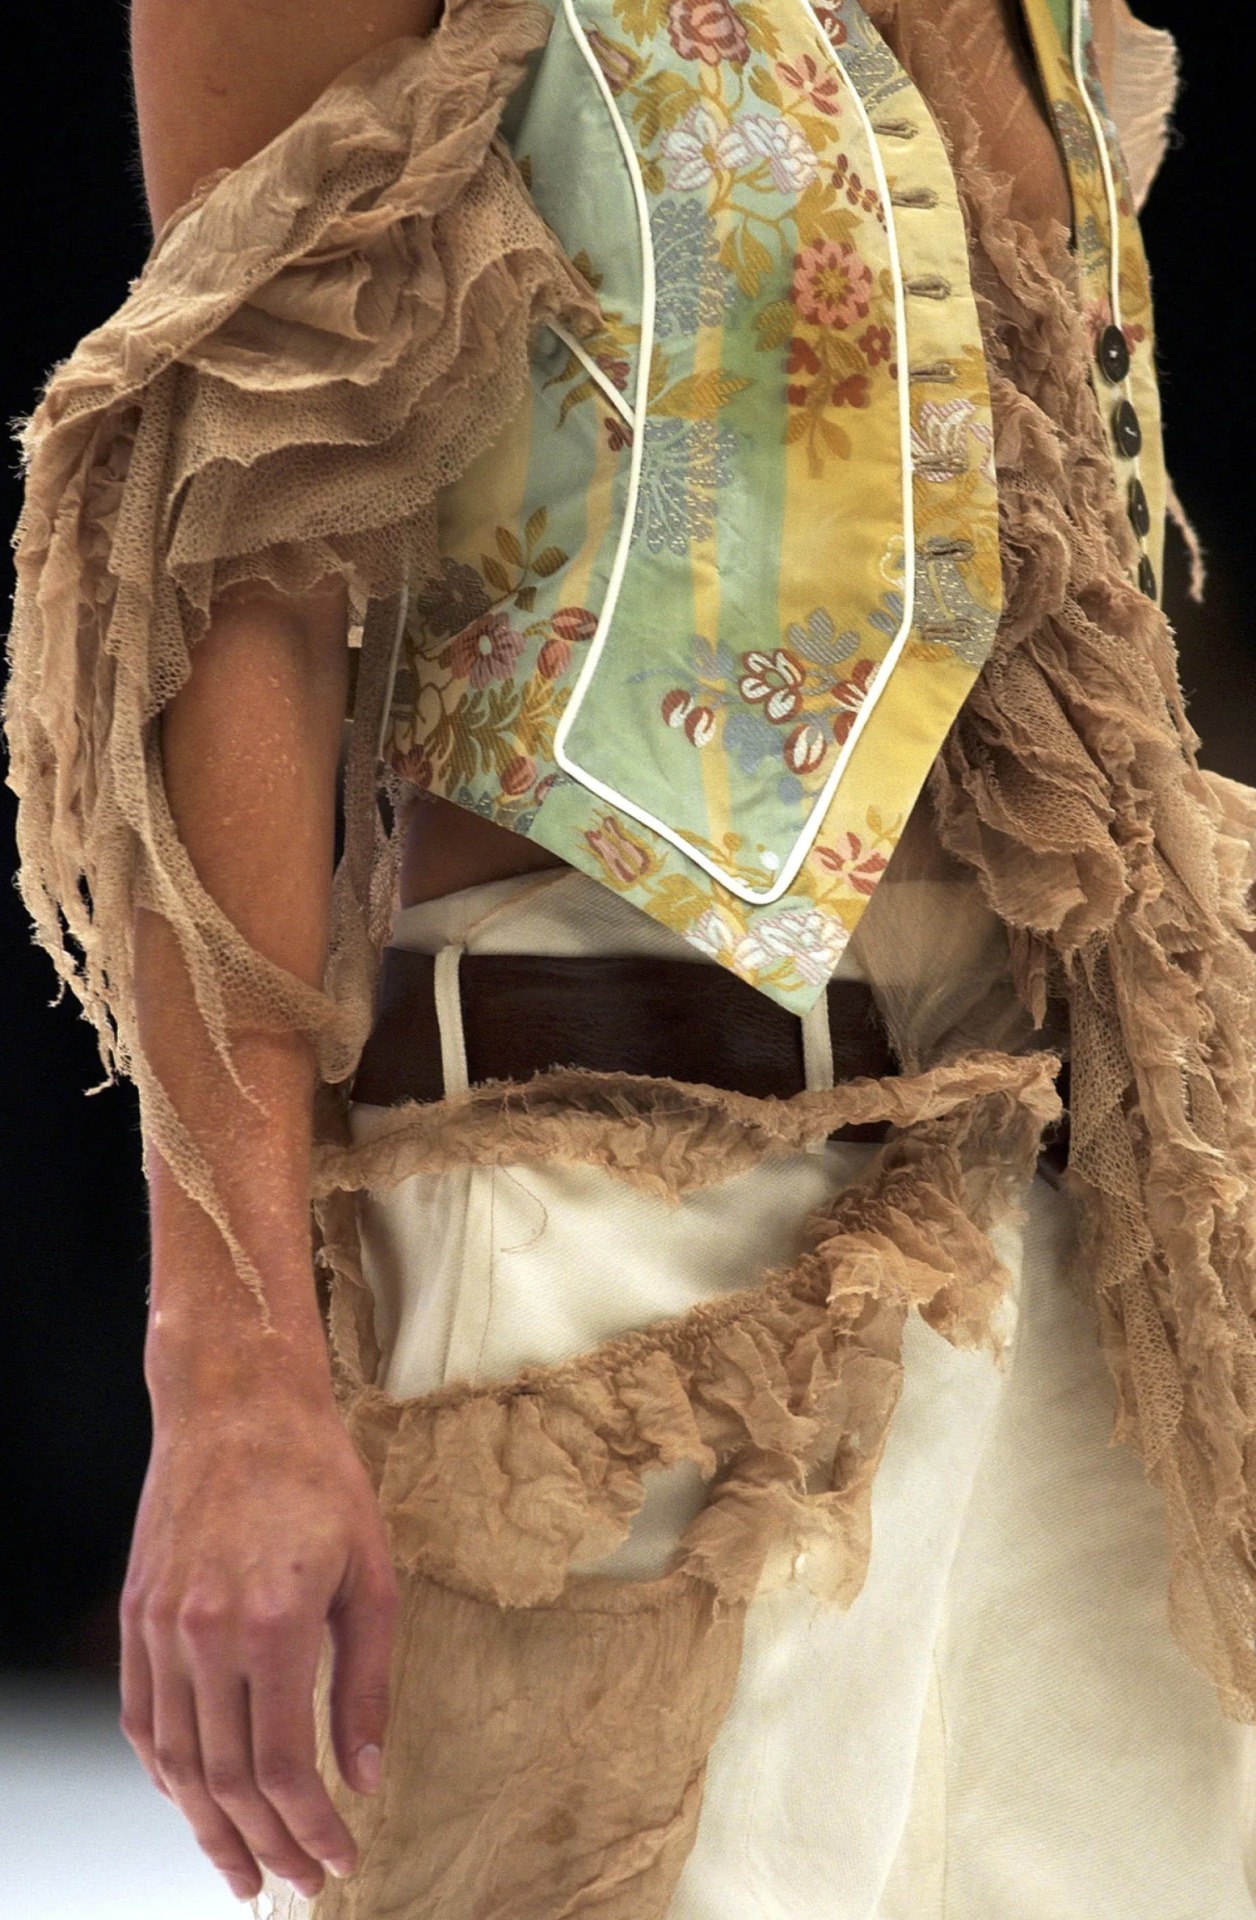 Pirate fashion from Alexander McQueen Spring 2003 RTW #pirates#pirate fashion#alexander mcqueen#runway details#pirate looks#lee mcqueen#2000s#y2k runway#y2k fashion#ss03 #spring 2003 rtw  #I was doing research for Pirates of the Caribbean t-shirts at work and looked up what the fashion world was doing the same year  #I refuse to use the word fit or the suffix core so I am not tagging with those things no matter how trendy they are  #yes yes I am very annoying